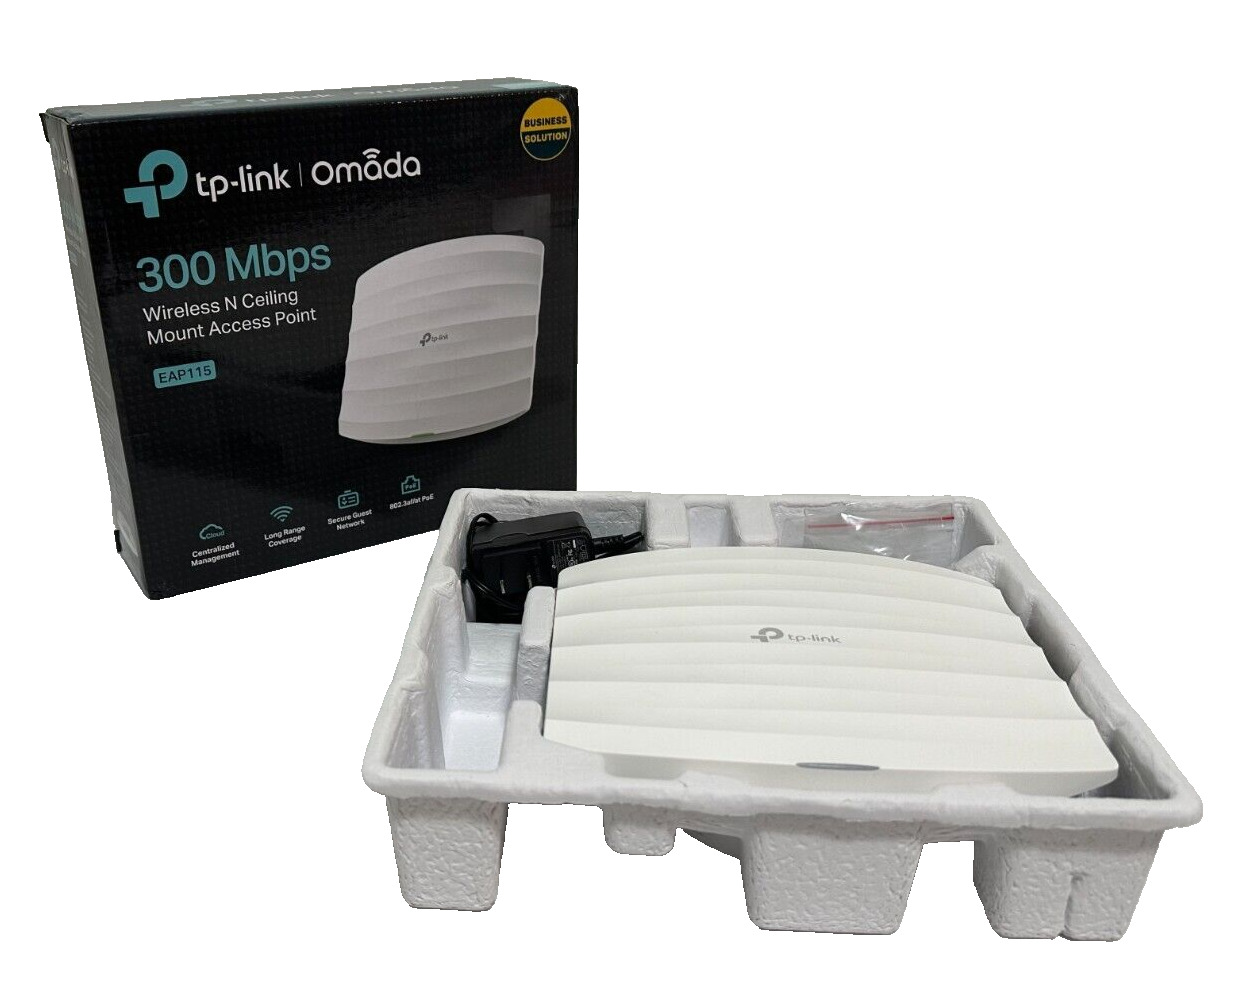 TP-LINK Omada EAP115 300 Mbps Wireless N Ceiling Mount Access Point NEW